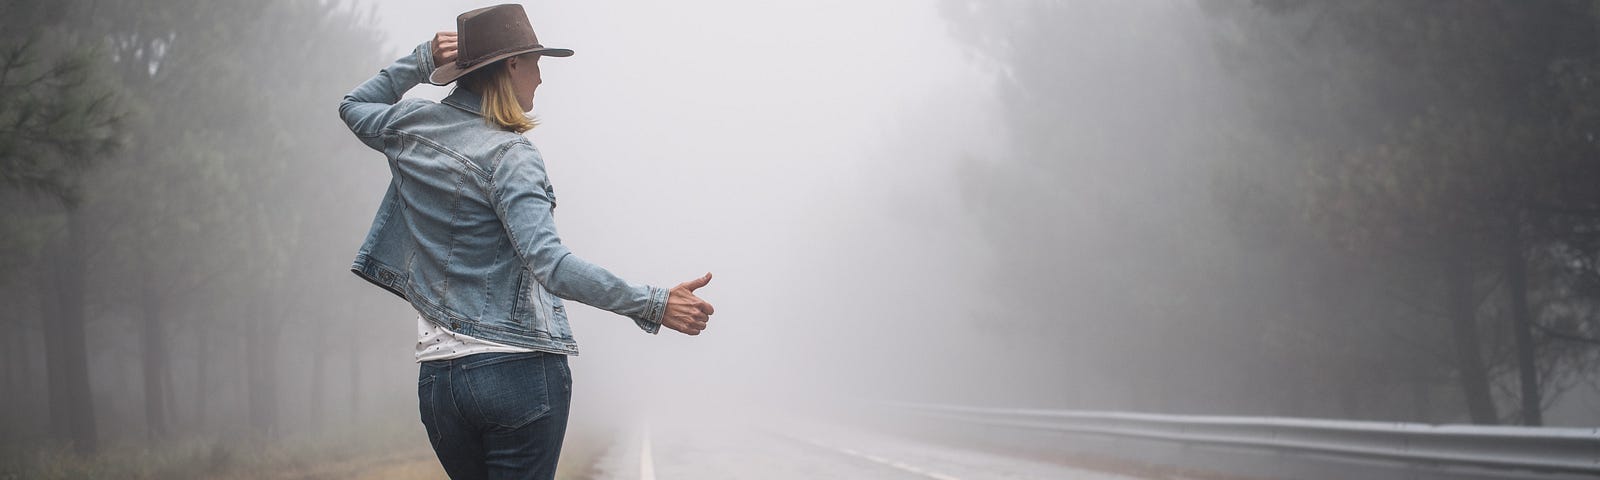 A female hitchhiker with a cowboy hat stands beside the road, her right arm extended with her thumb up.